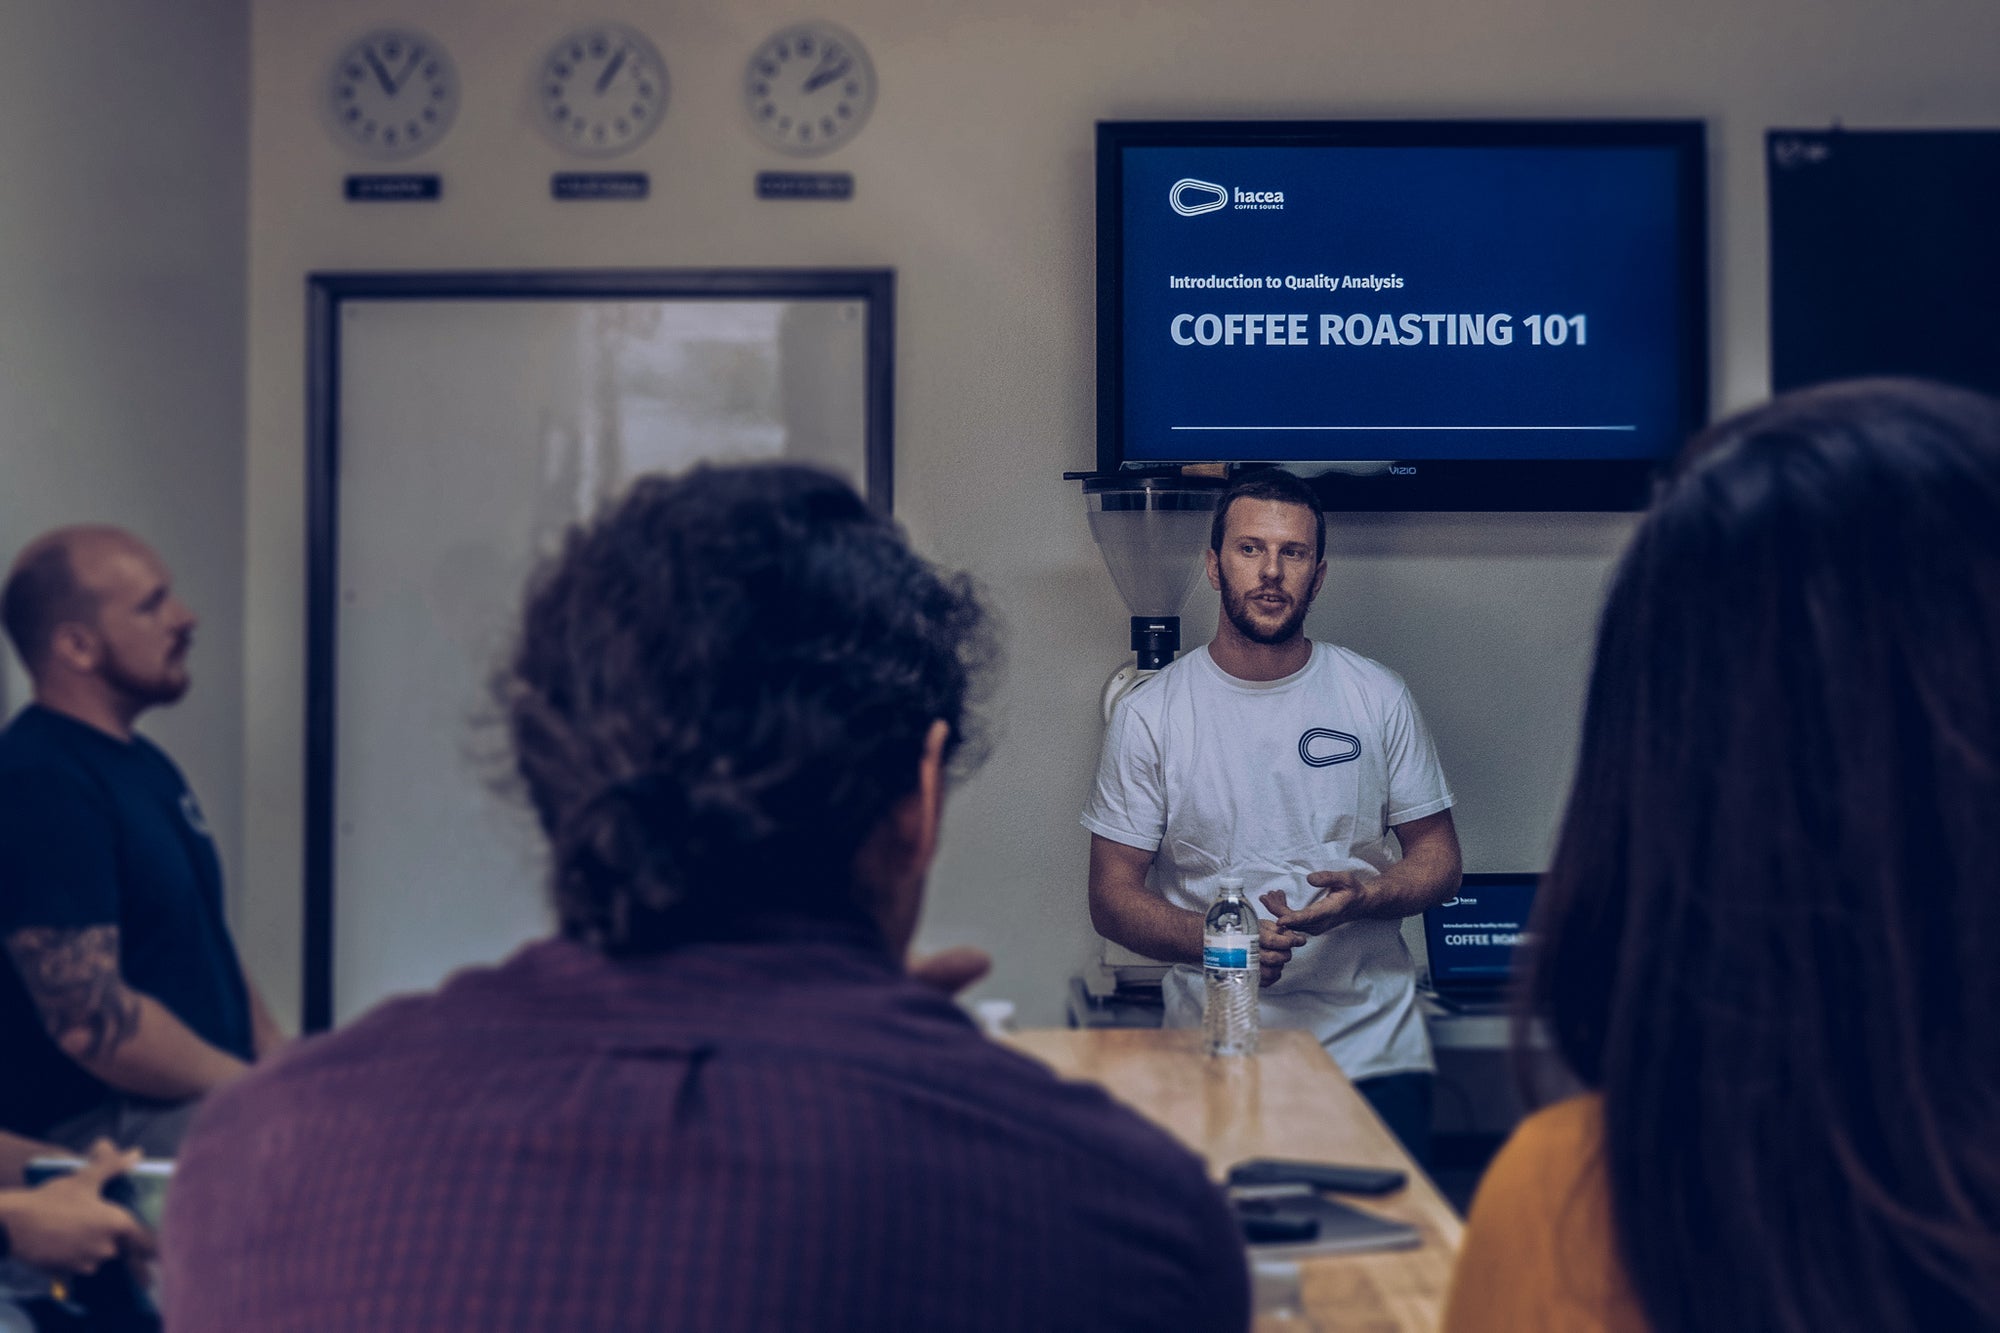 Coffee Roasting 101 - Introduction to Coffee Roasting - May 4th